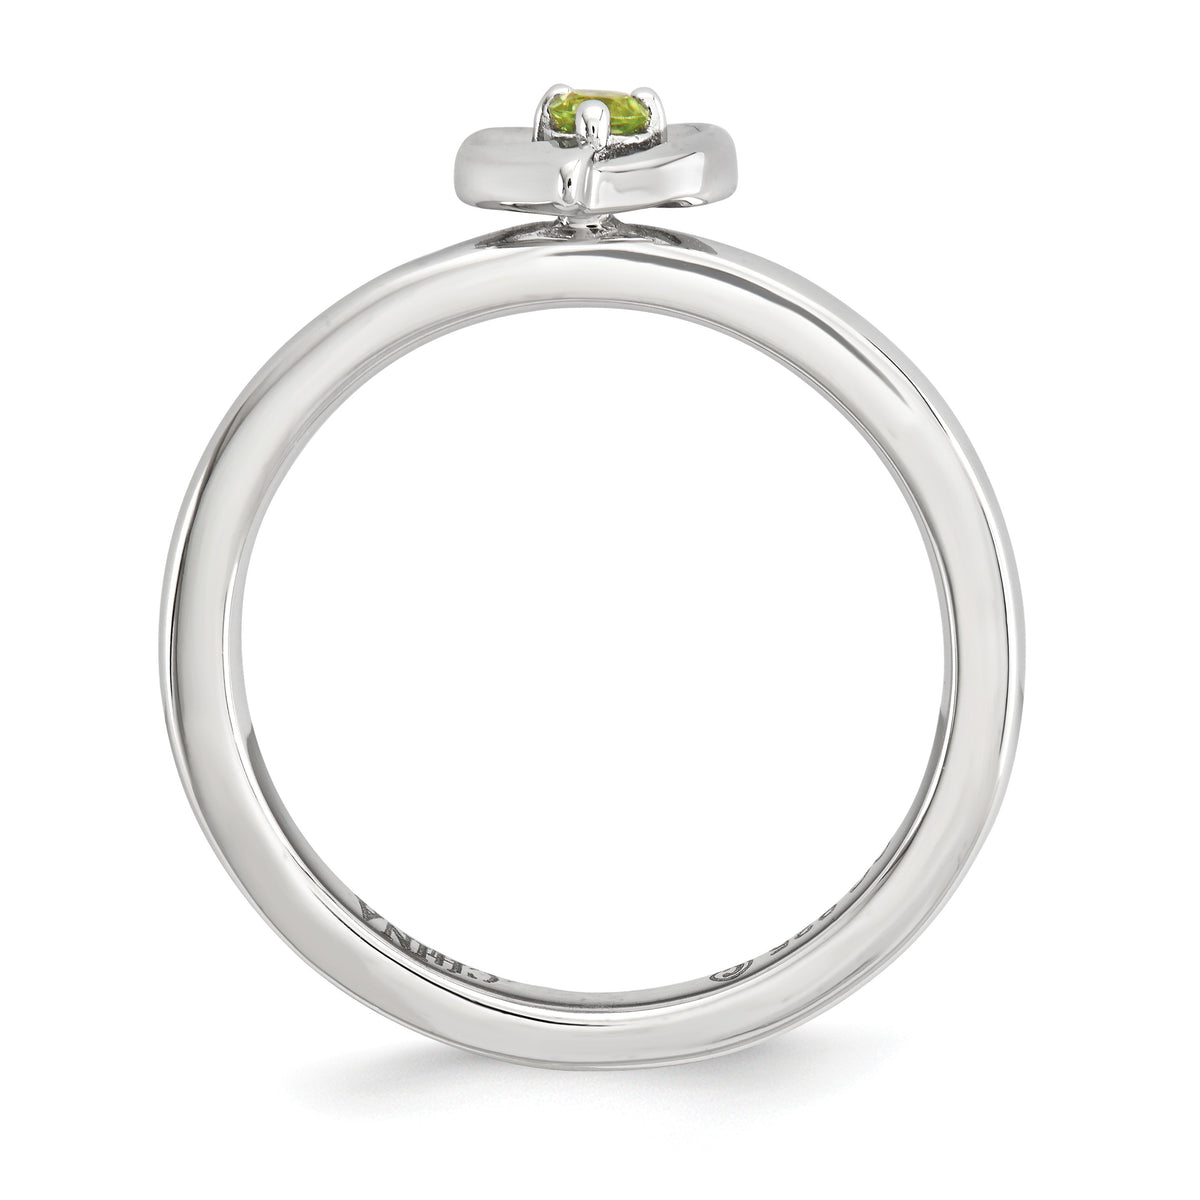 Alternate view of the Sterling Silver Stackable Expressions Peridot 6mm Heart Ring by The Black Bow Jewelry Co.